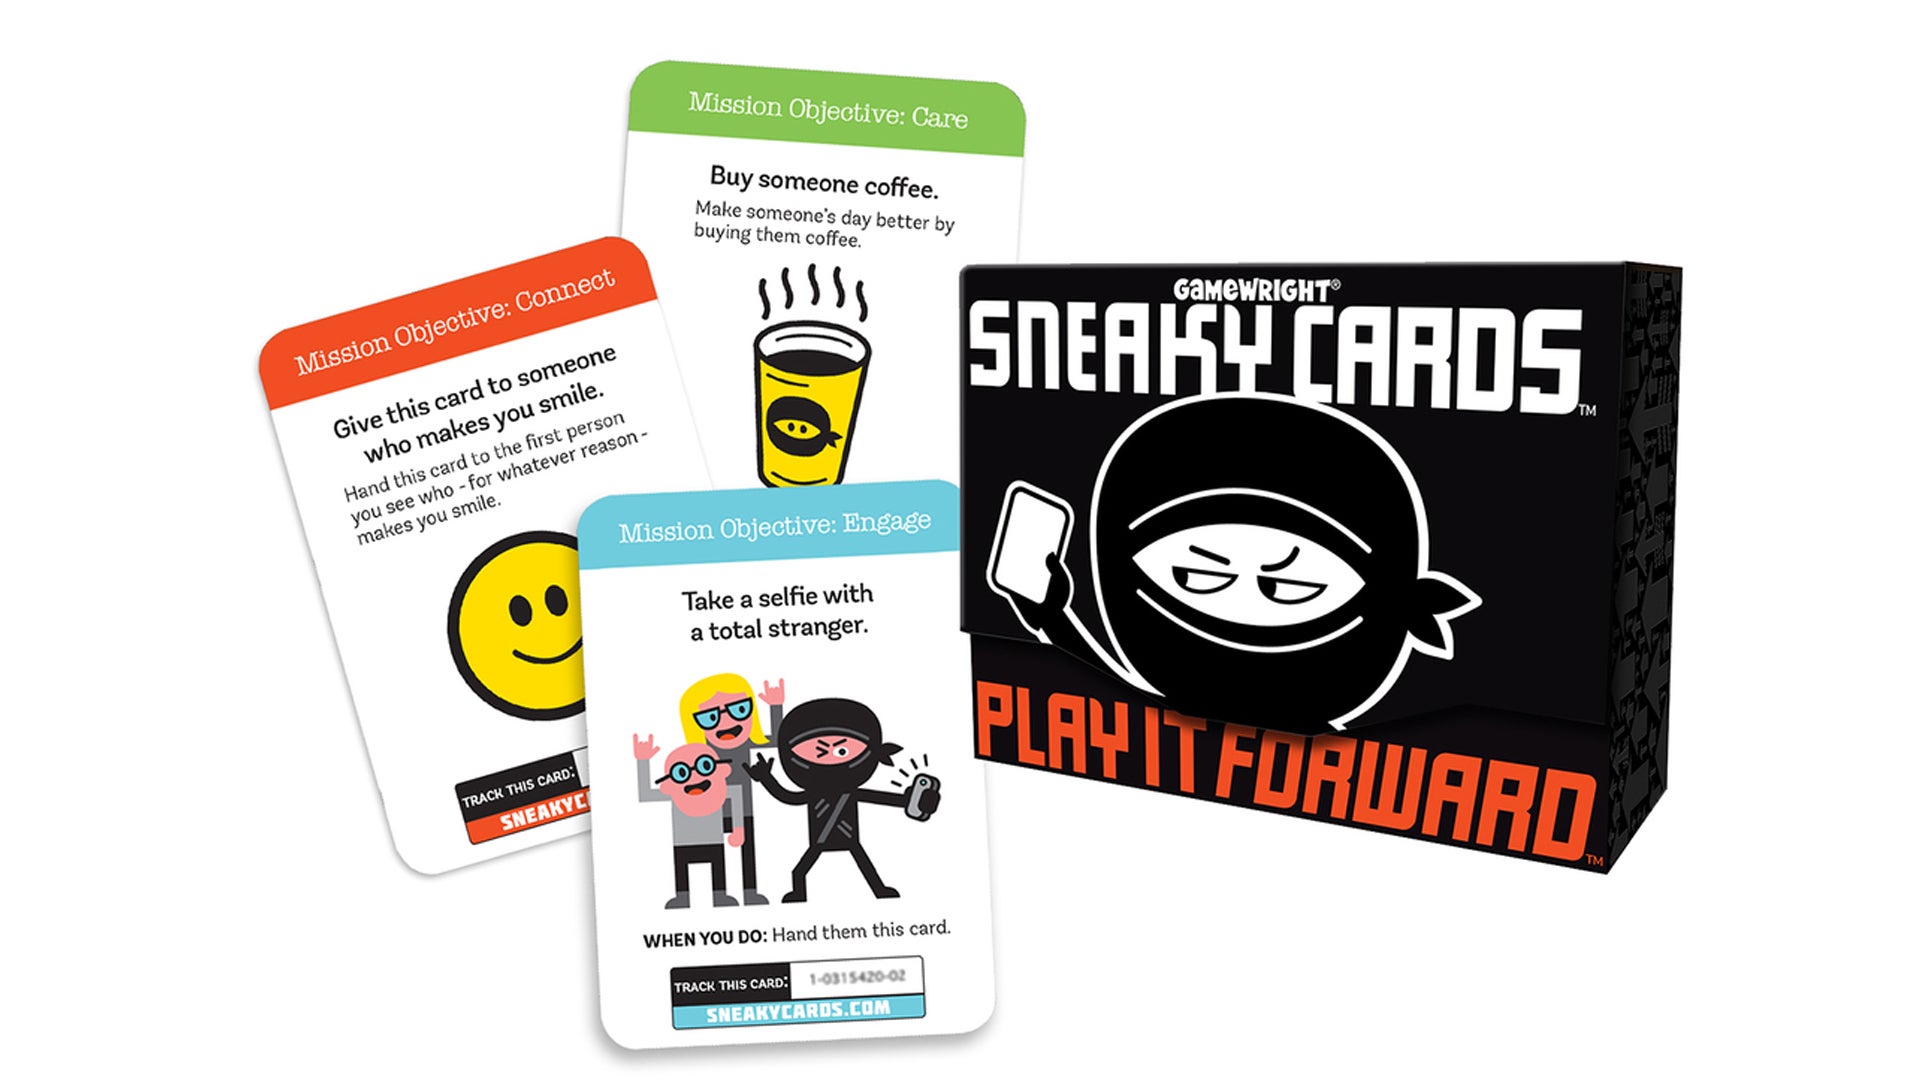 Image for Gamewright releases free print and play version of Sneaky Cards for socially distanced stealth